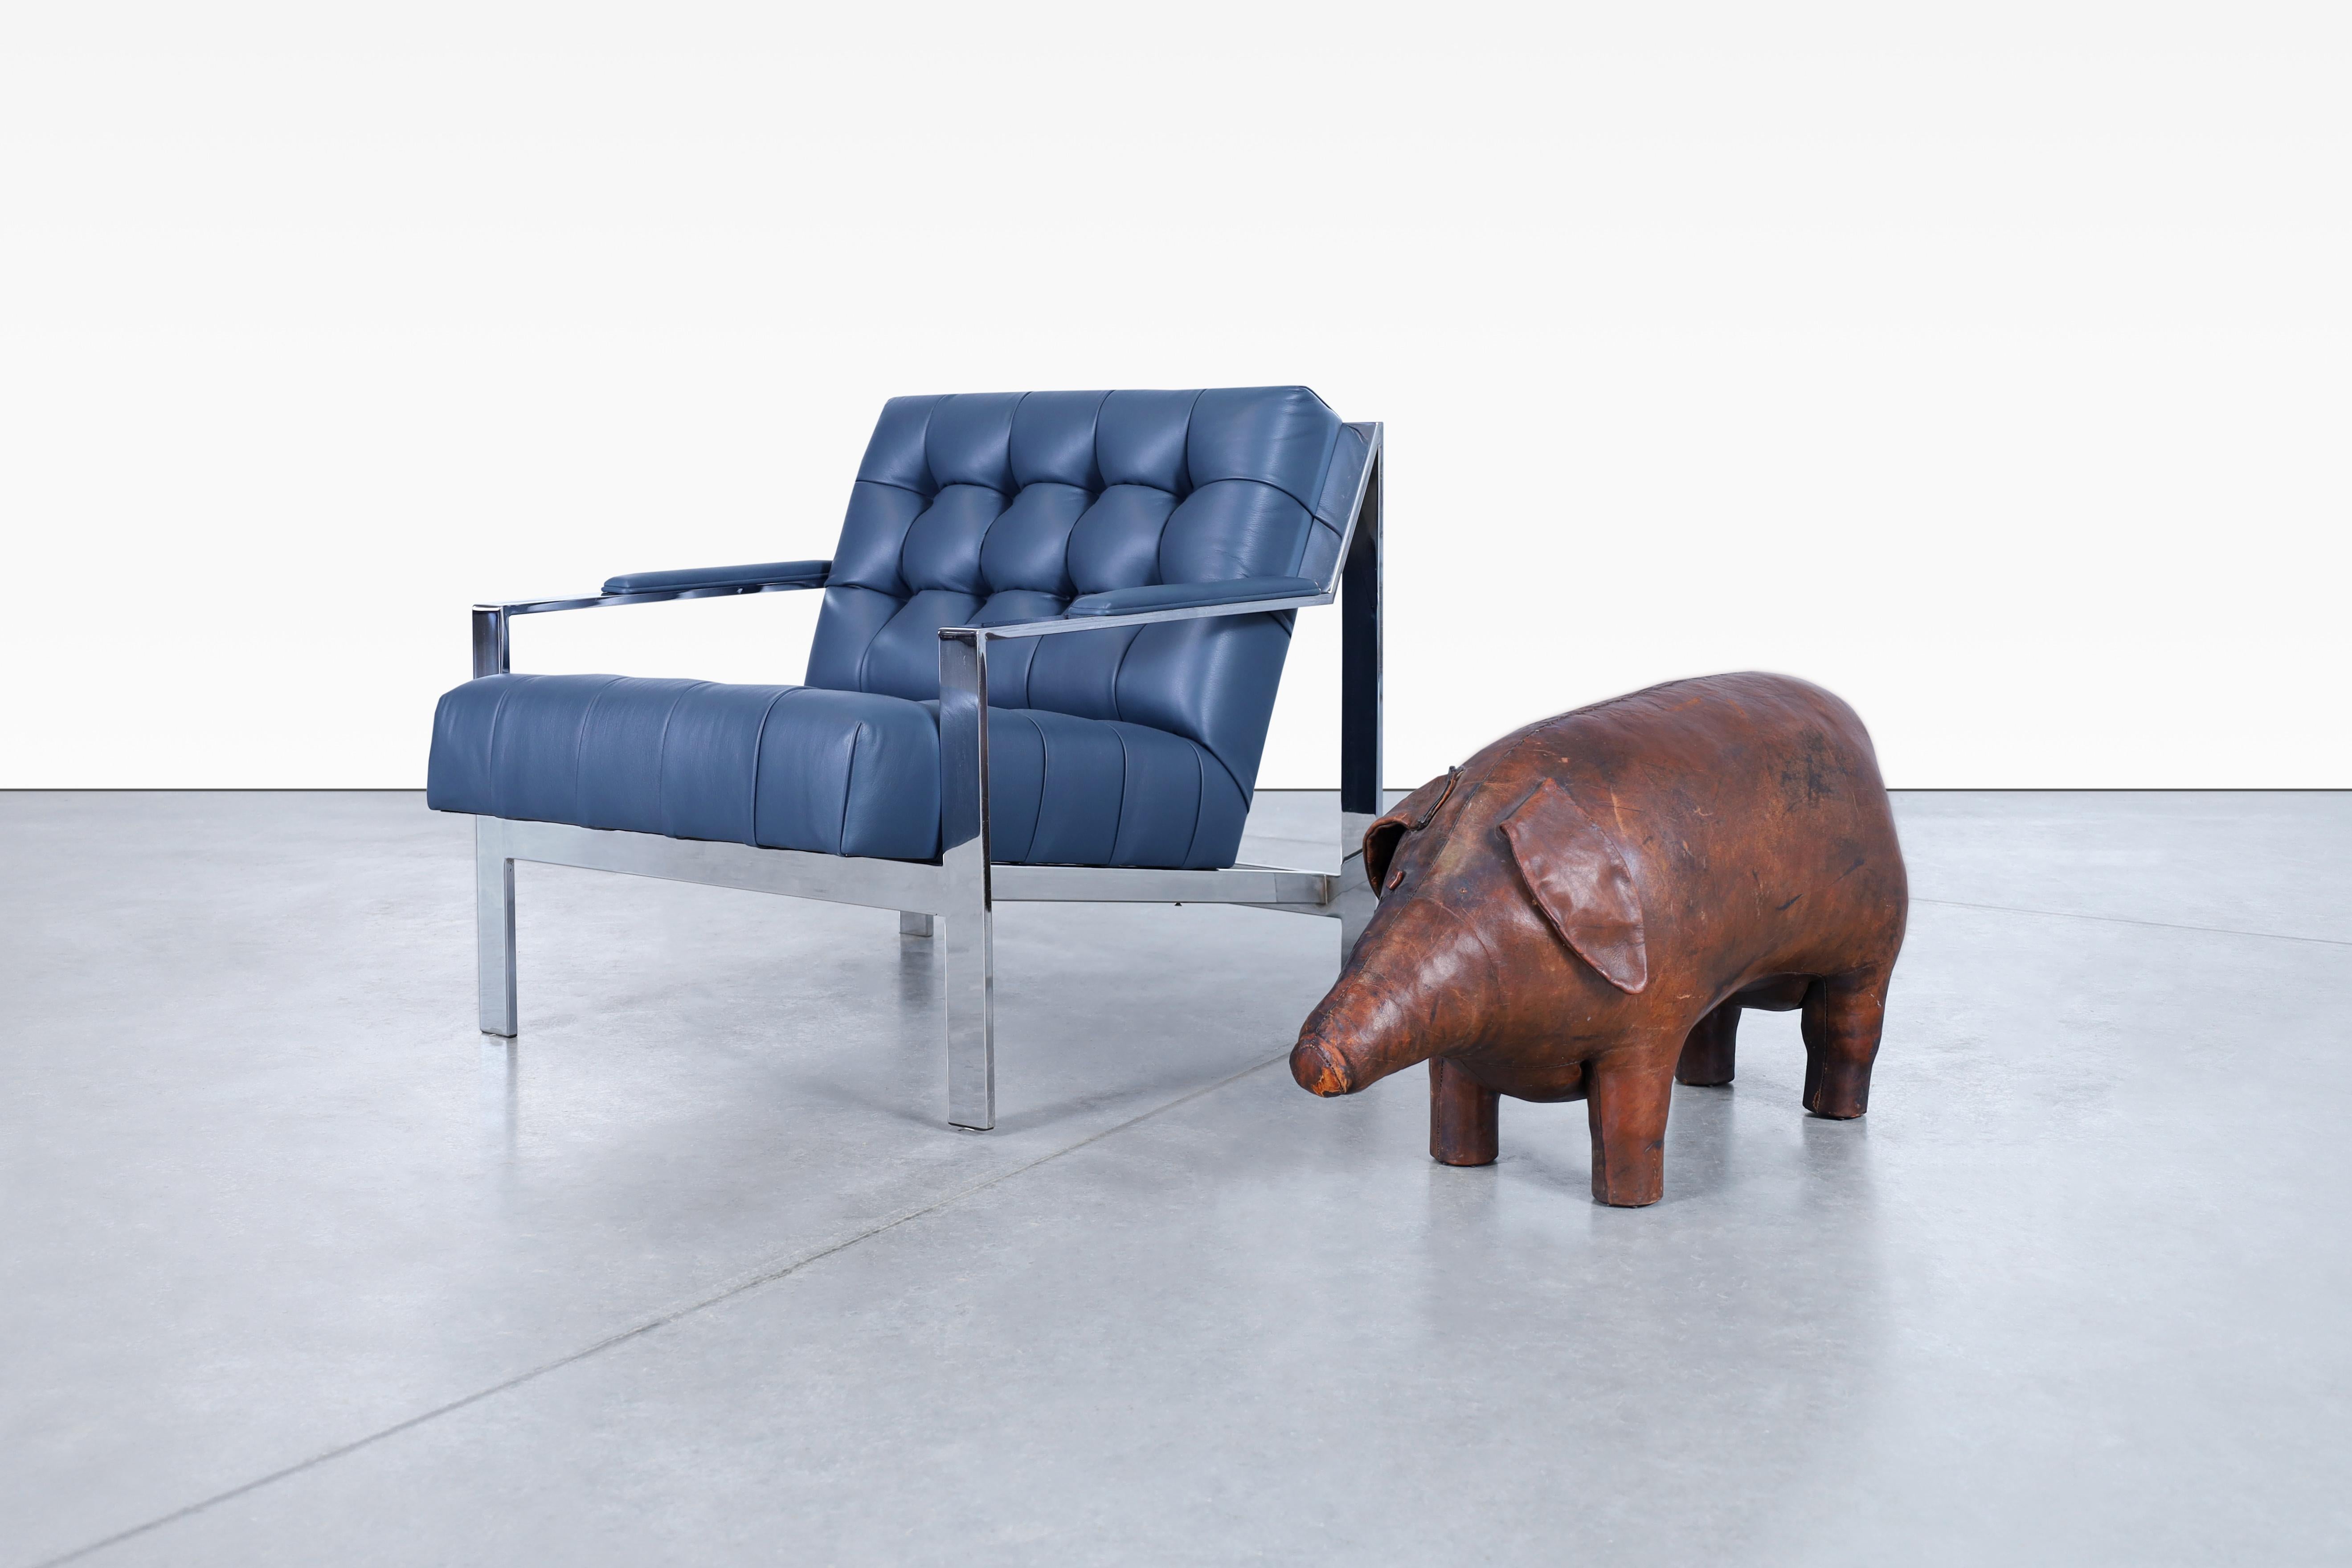 Adorable Abercrombie and Fitch leather pig footstool by Dimitri Omersa, manufactured in England, circa 1960s. This footstool showcases the high-quality craftsmanship and exquisite design. Originally designed to serve as a functional footstool, it